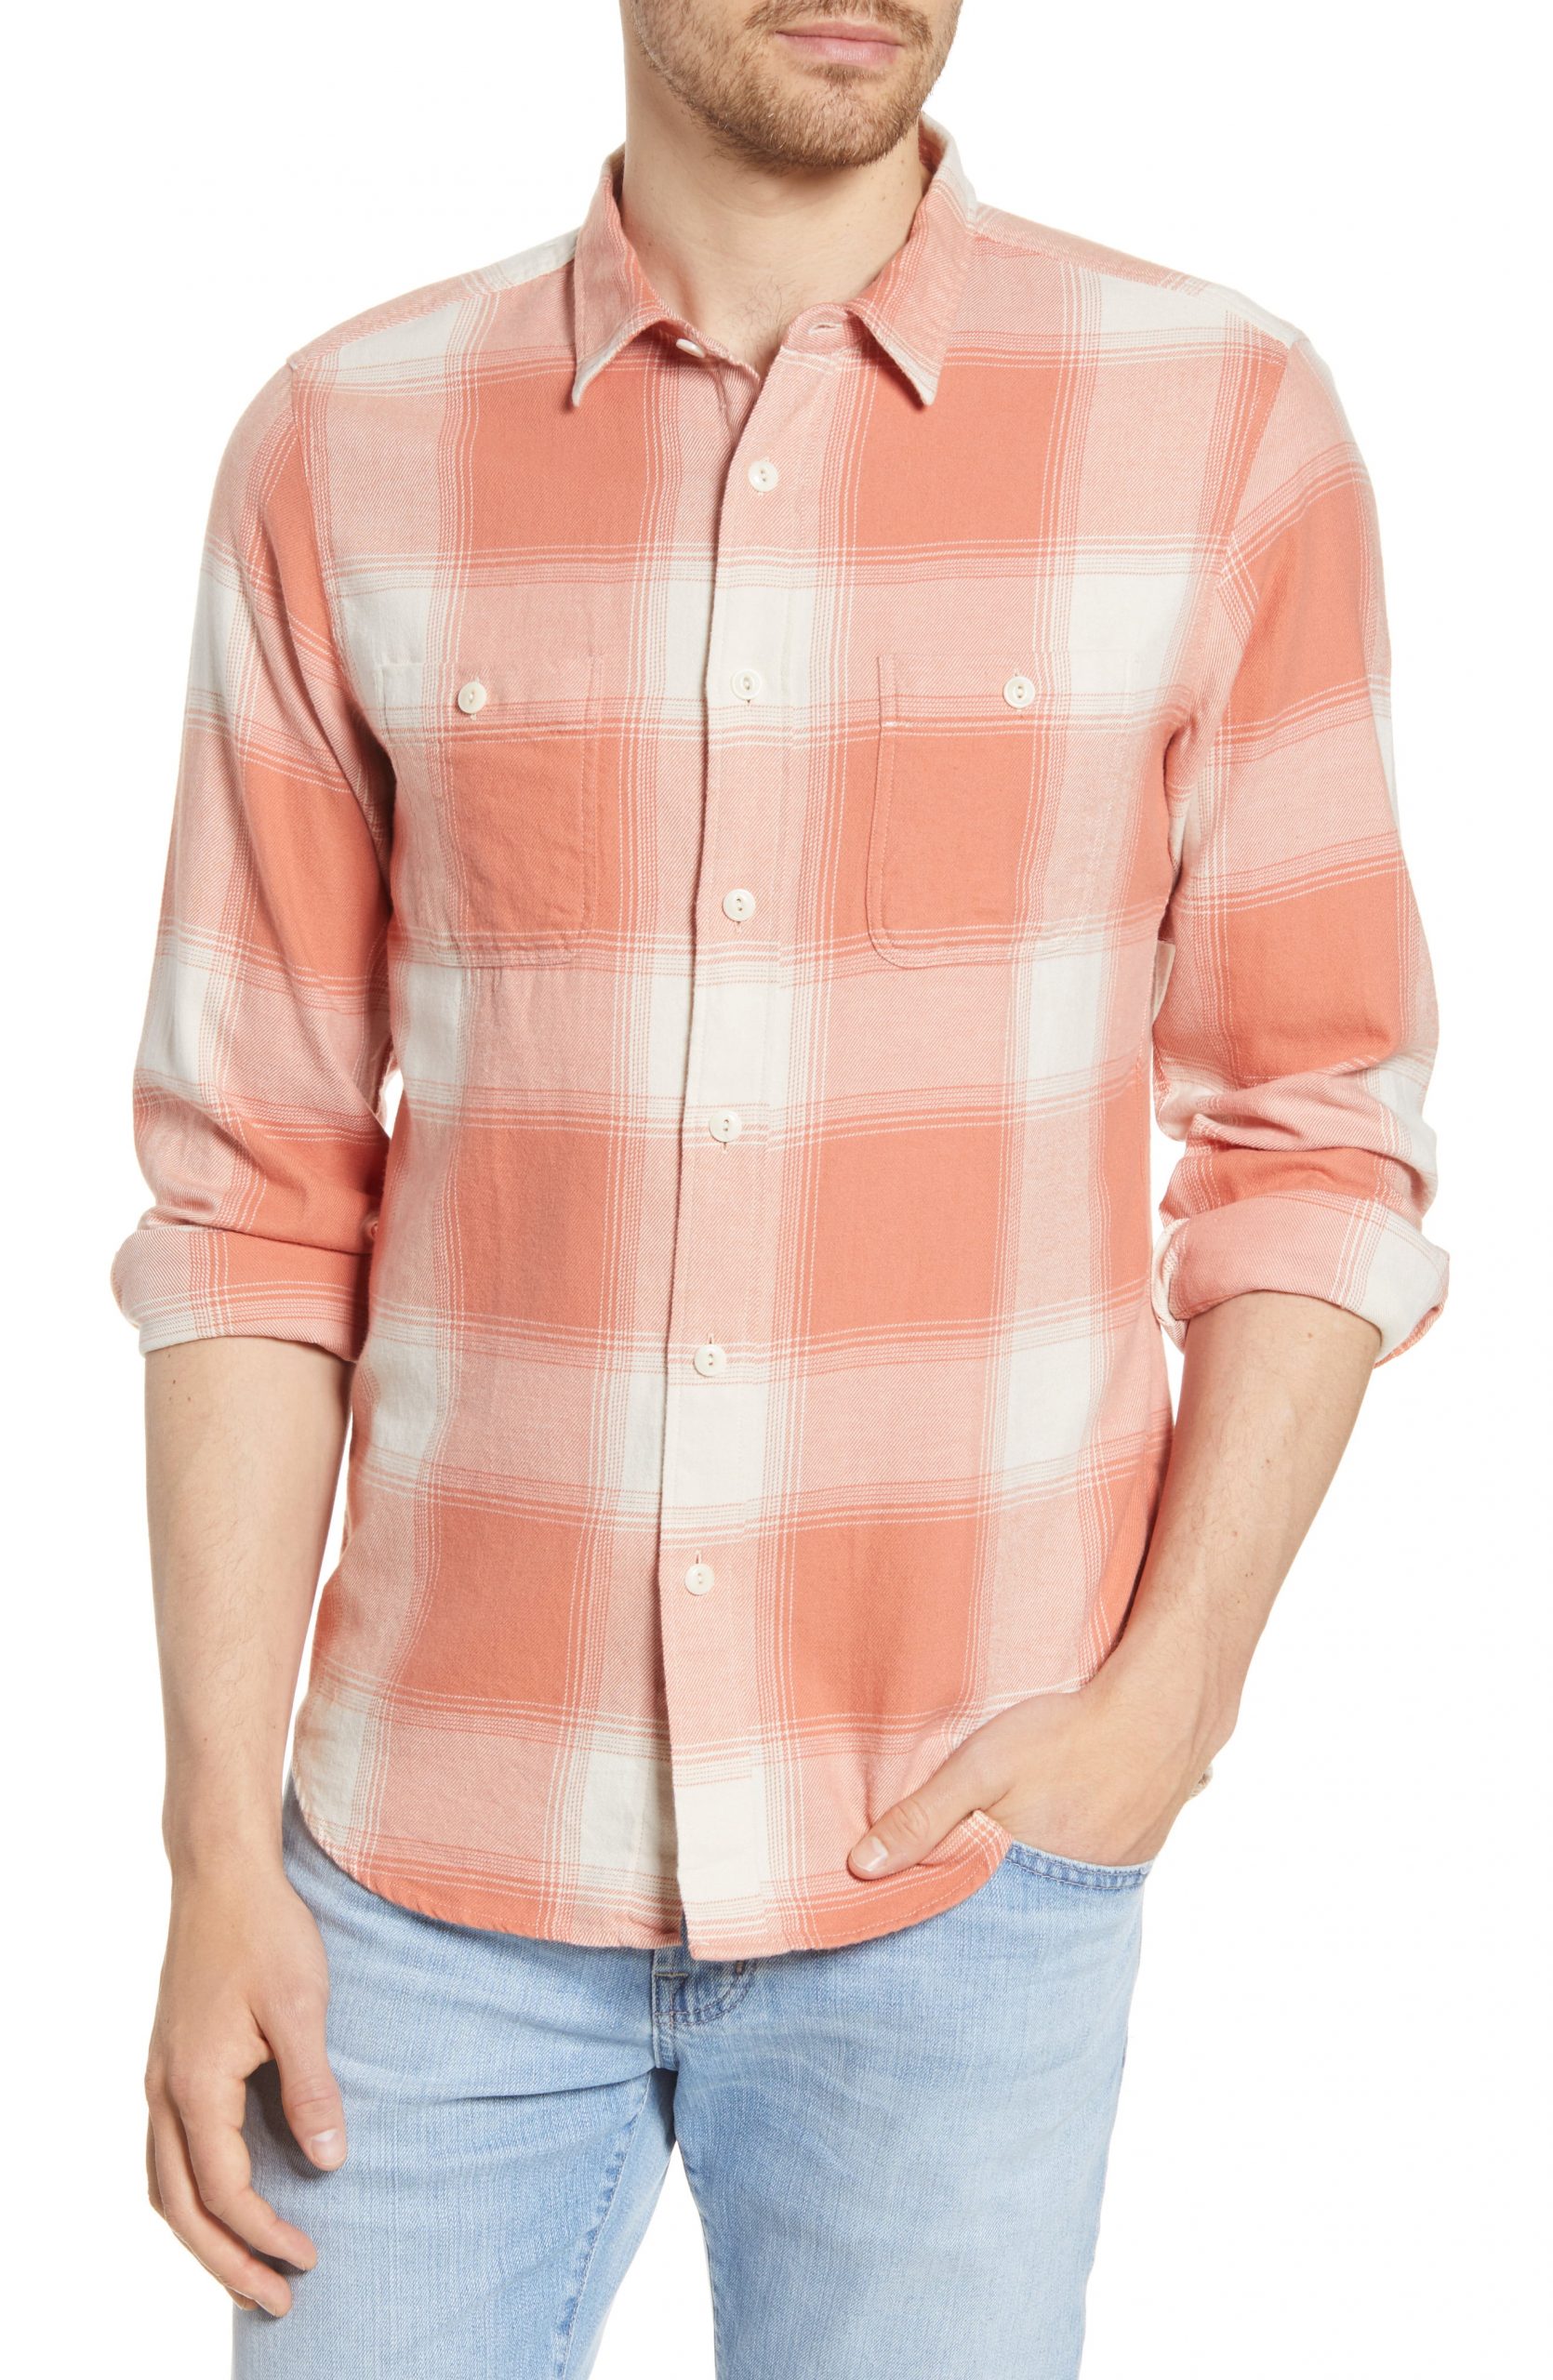 Men’s Madewell Brushed Cotton Perfect Shirt, Size Small - Orange | The ...